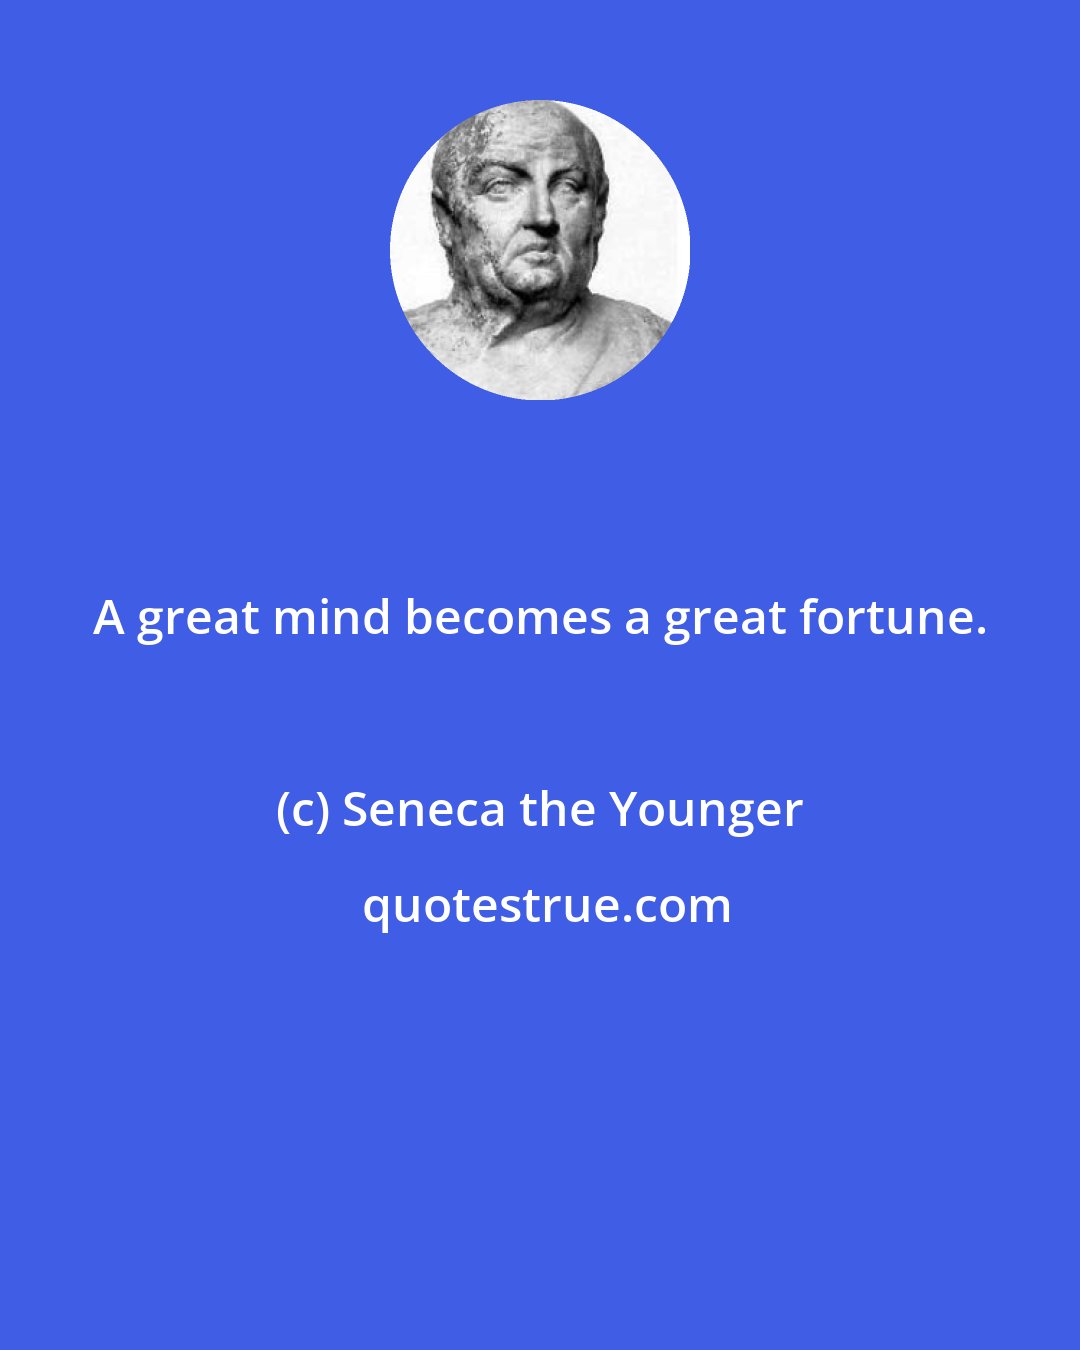 Seneca the Younger: A great mind becomes a great fortune.